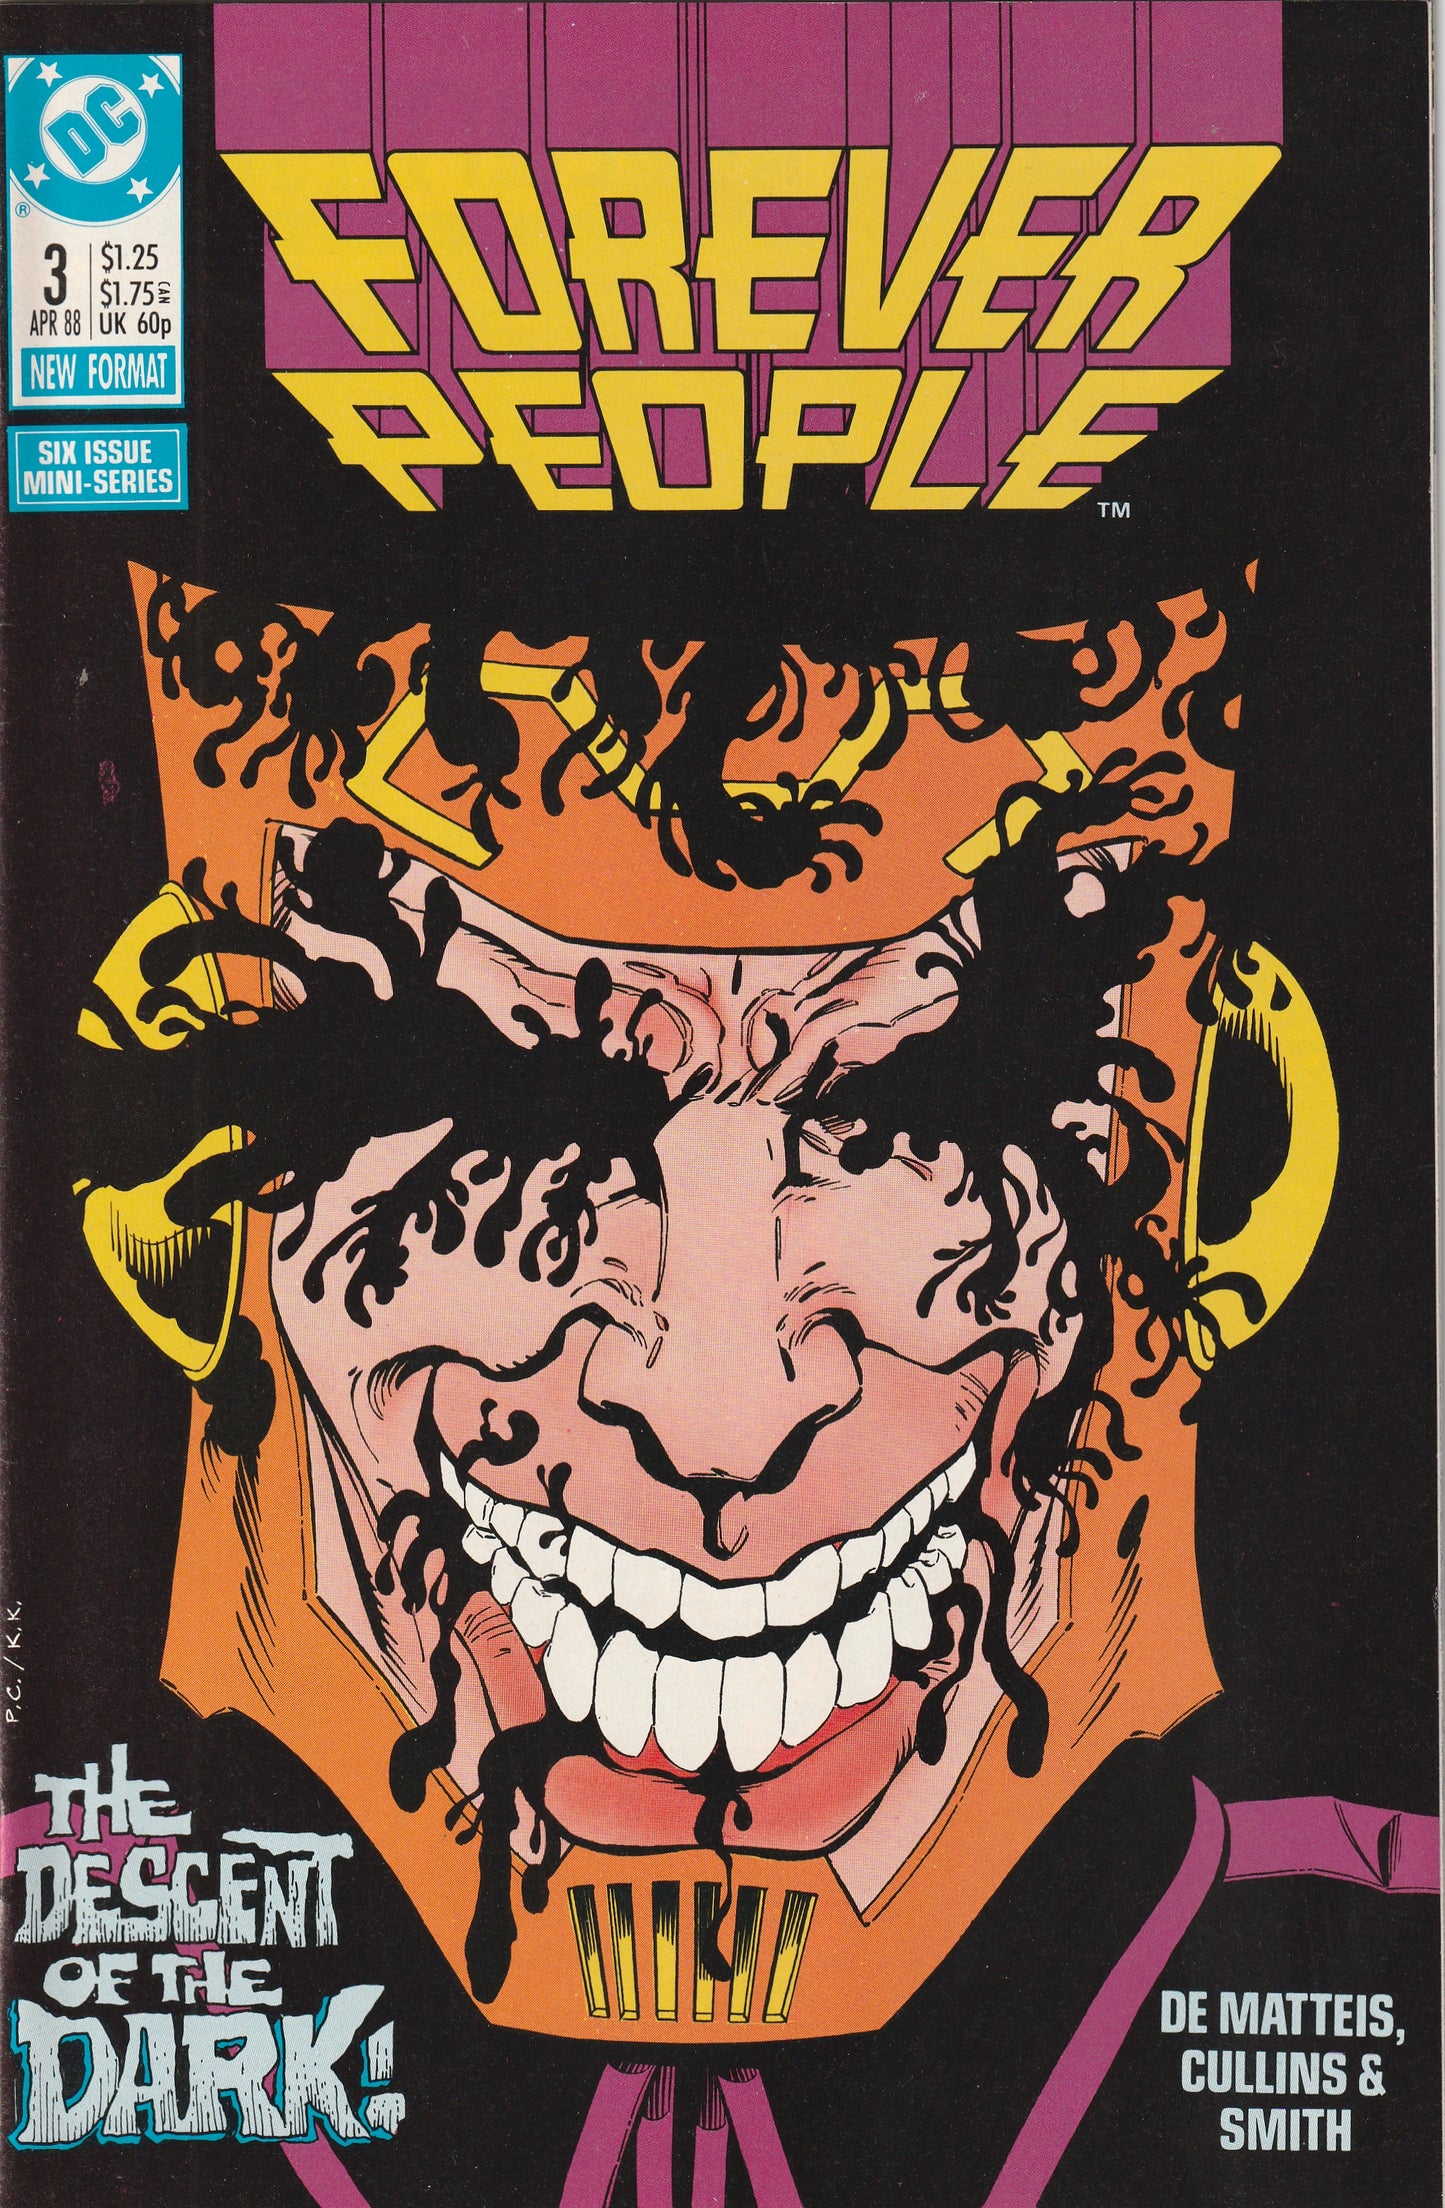 Forever People (1988) - Complete 6 issue mini-series